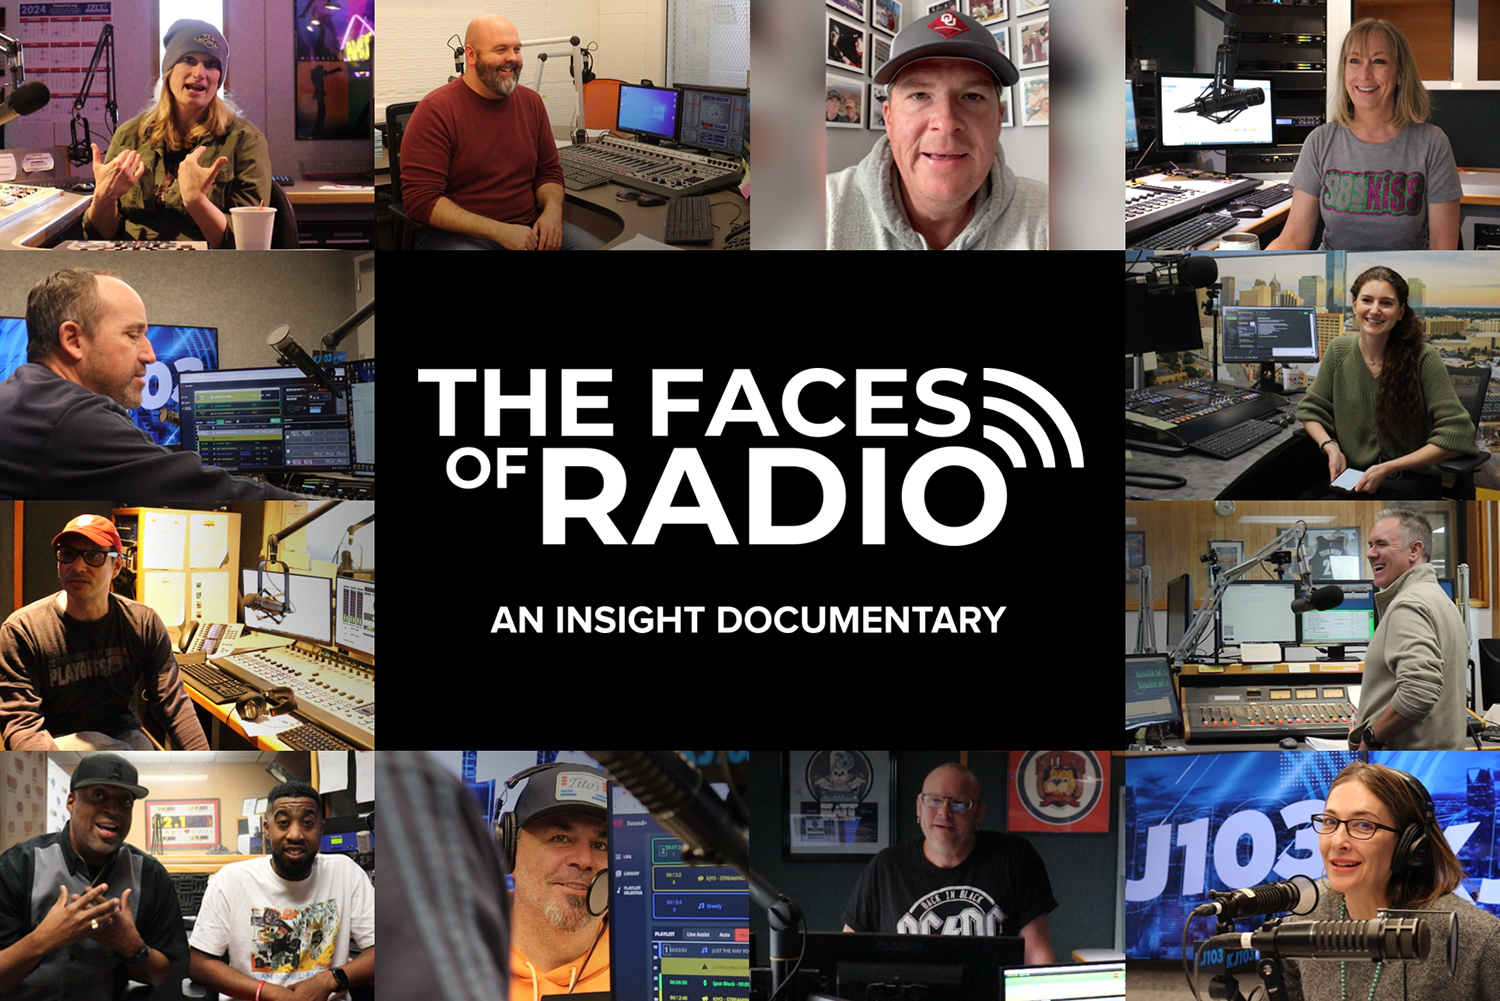 The Faces of Radio: An Insight documentary